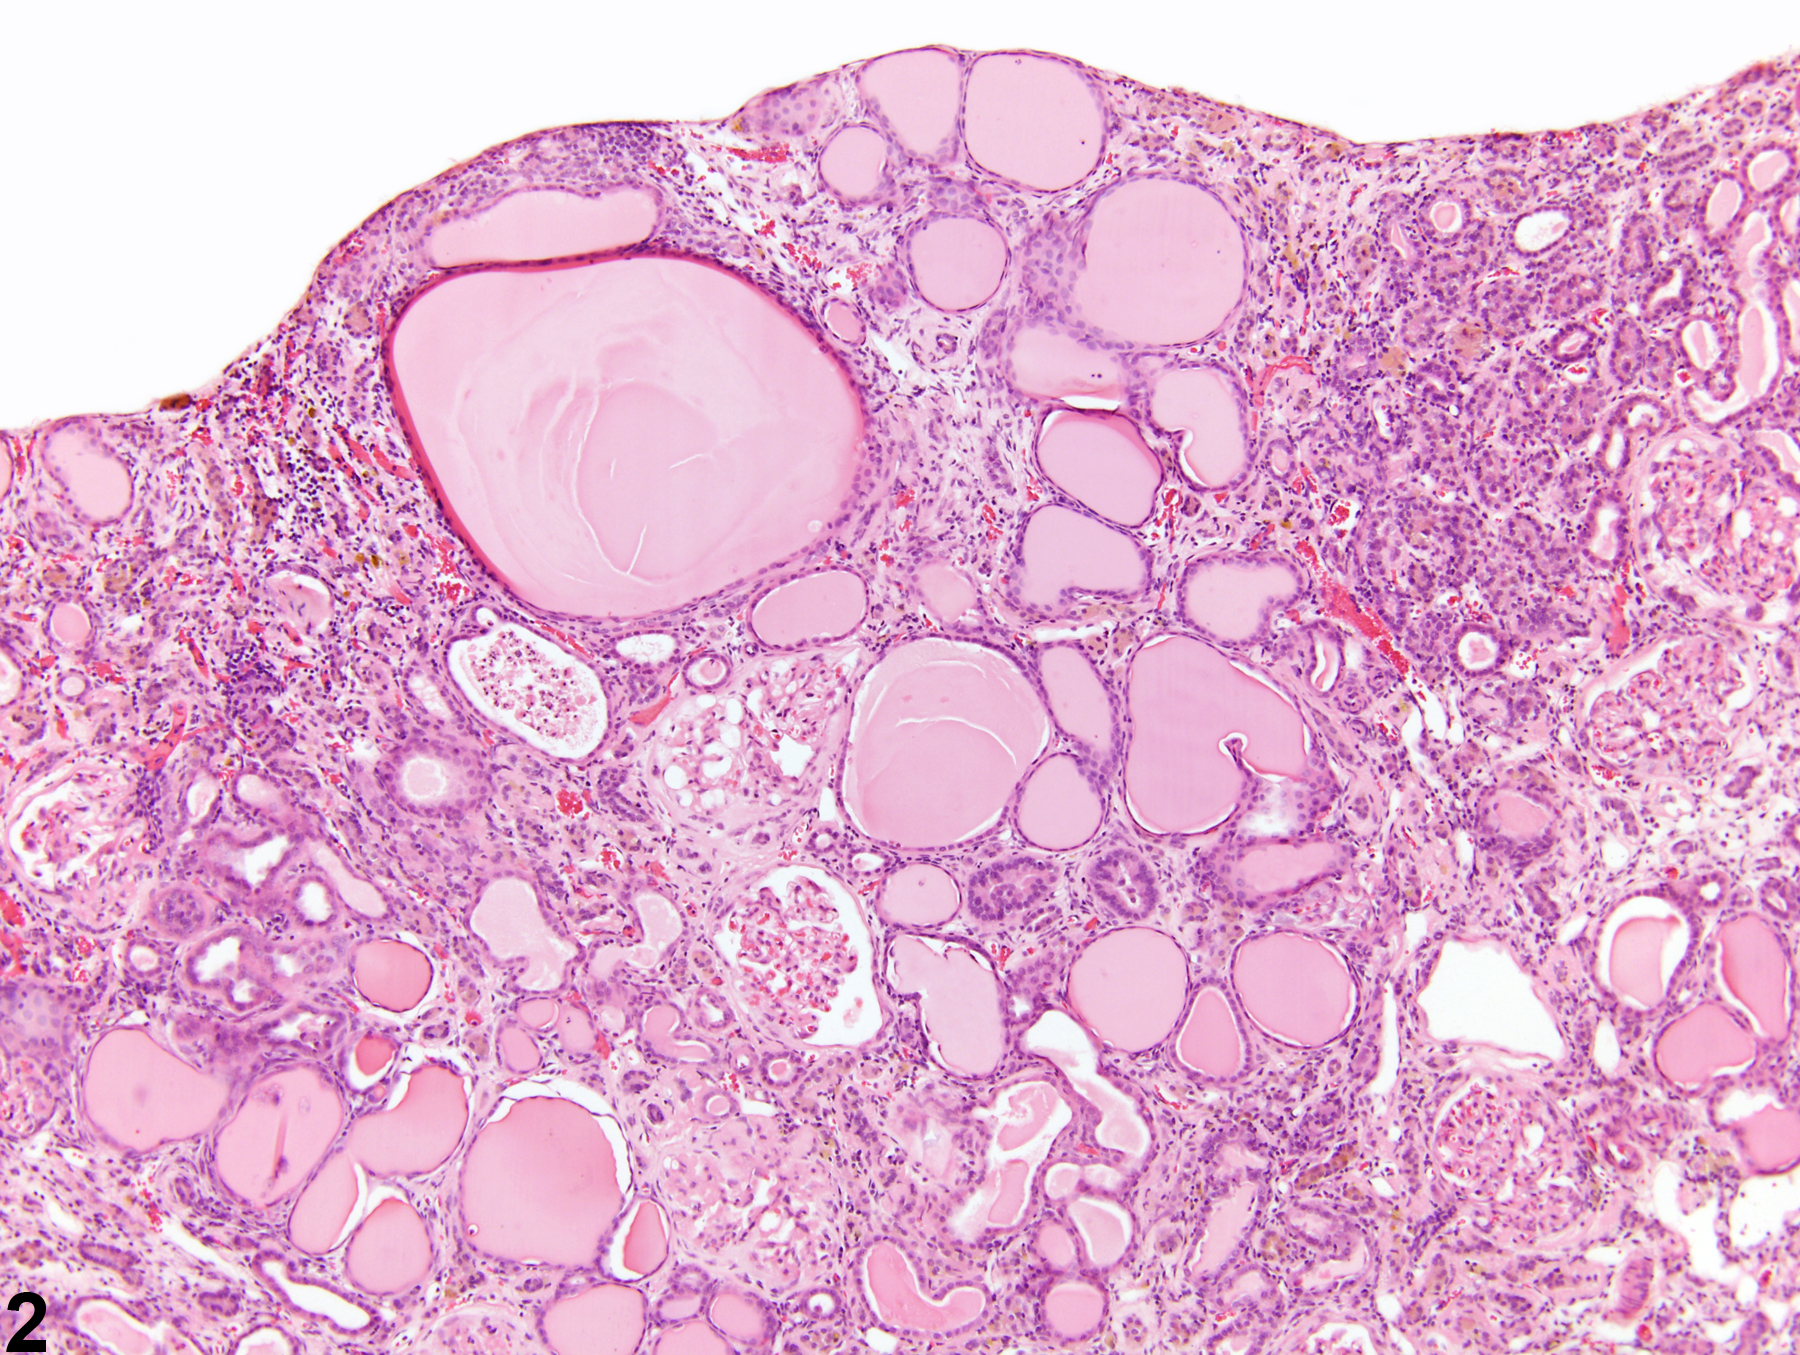 Image of nephropathy, chronic progressive in the kidney from a male F344/N rat in a chronic study